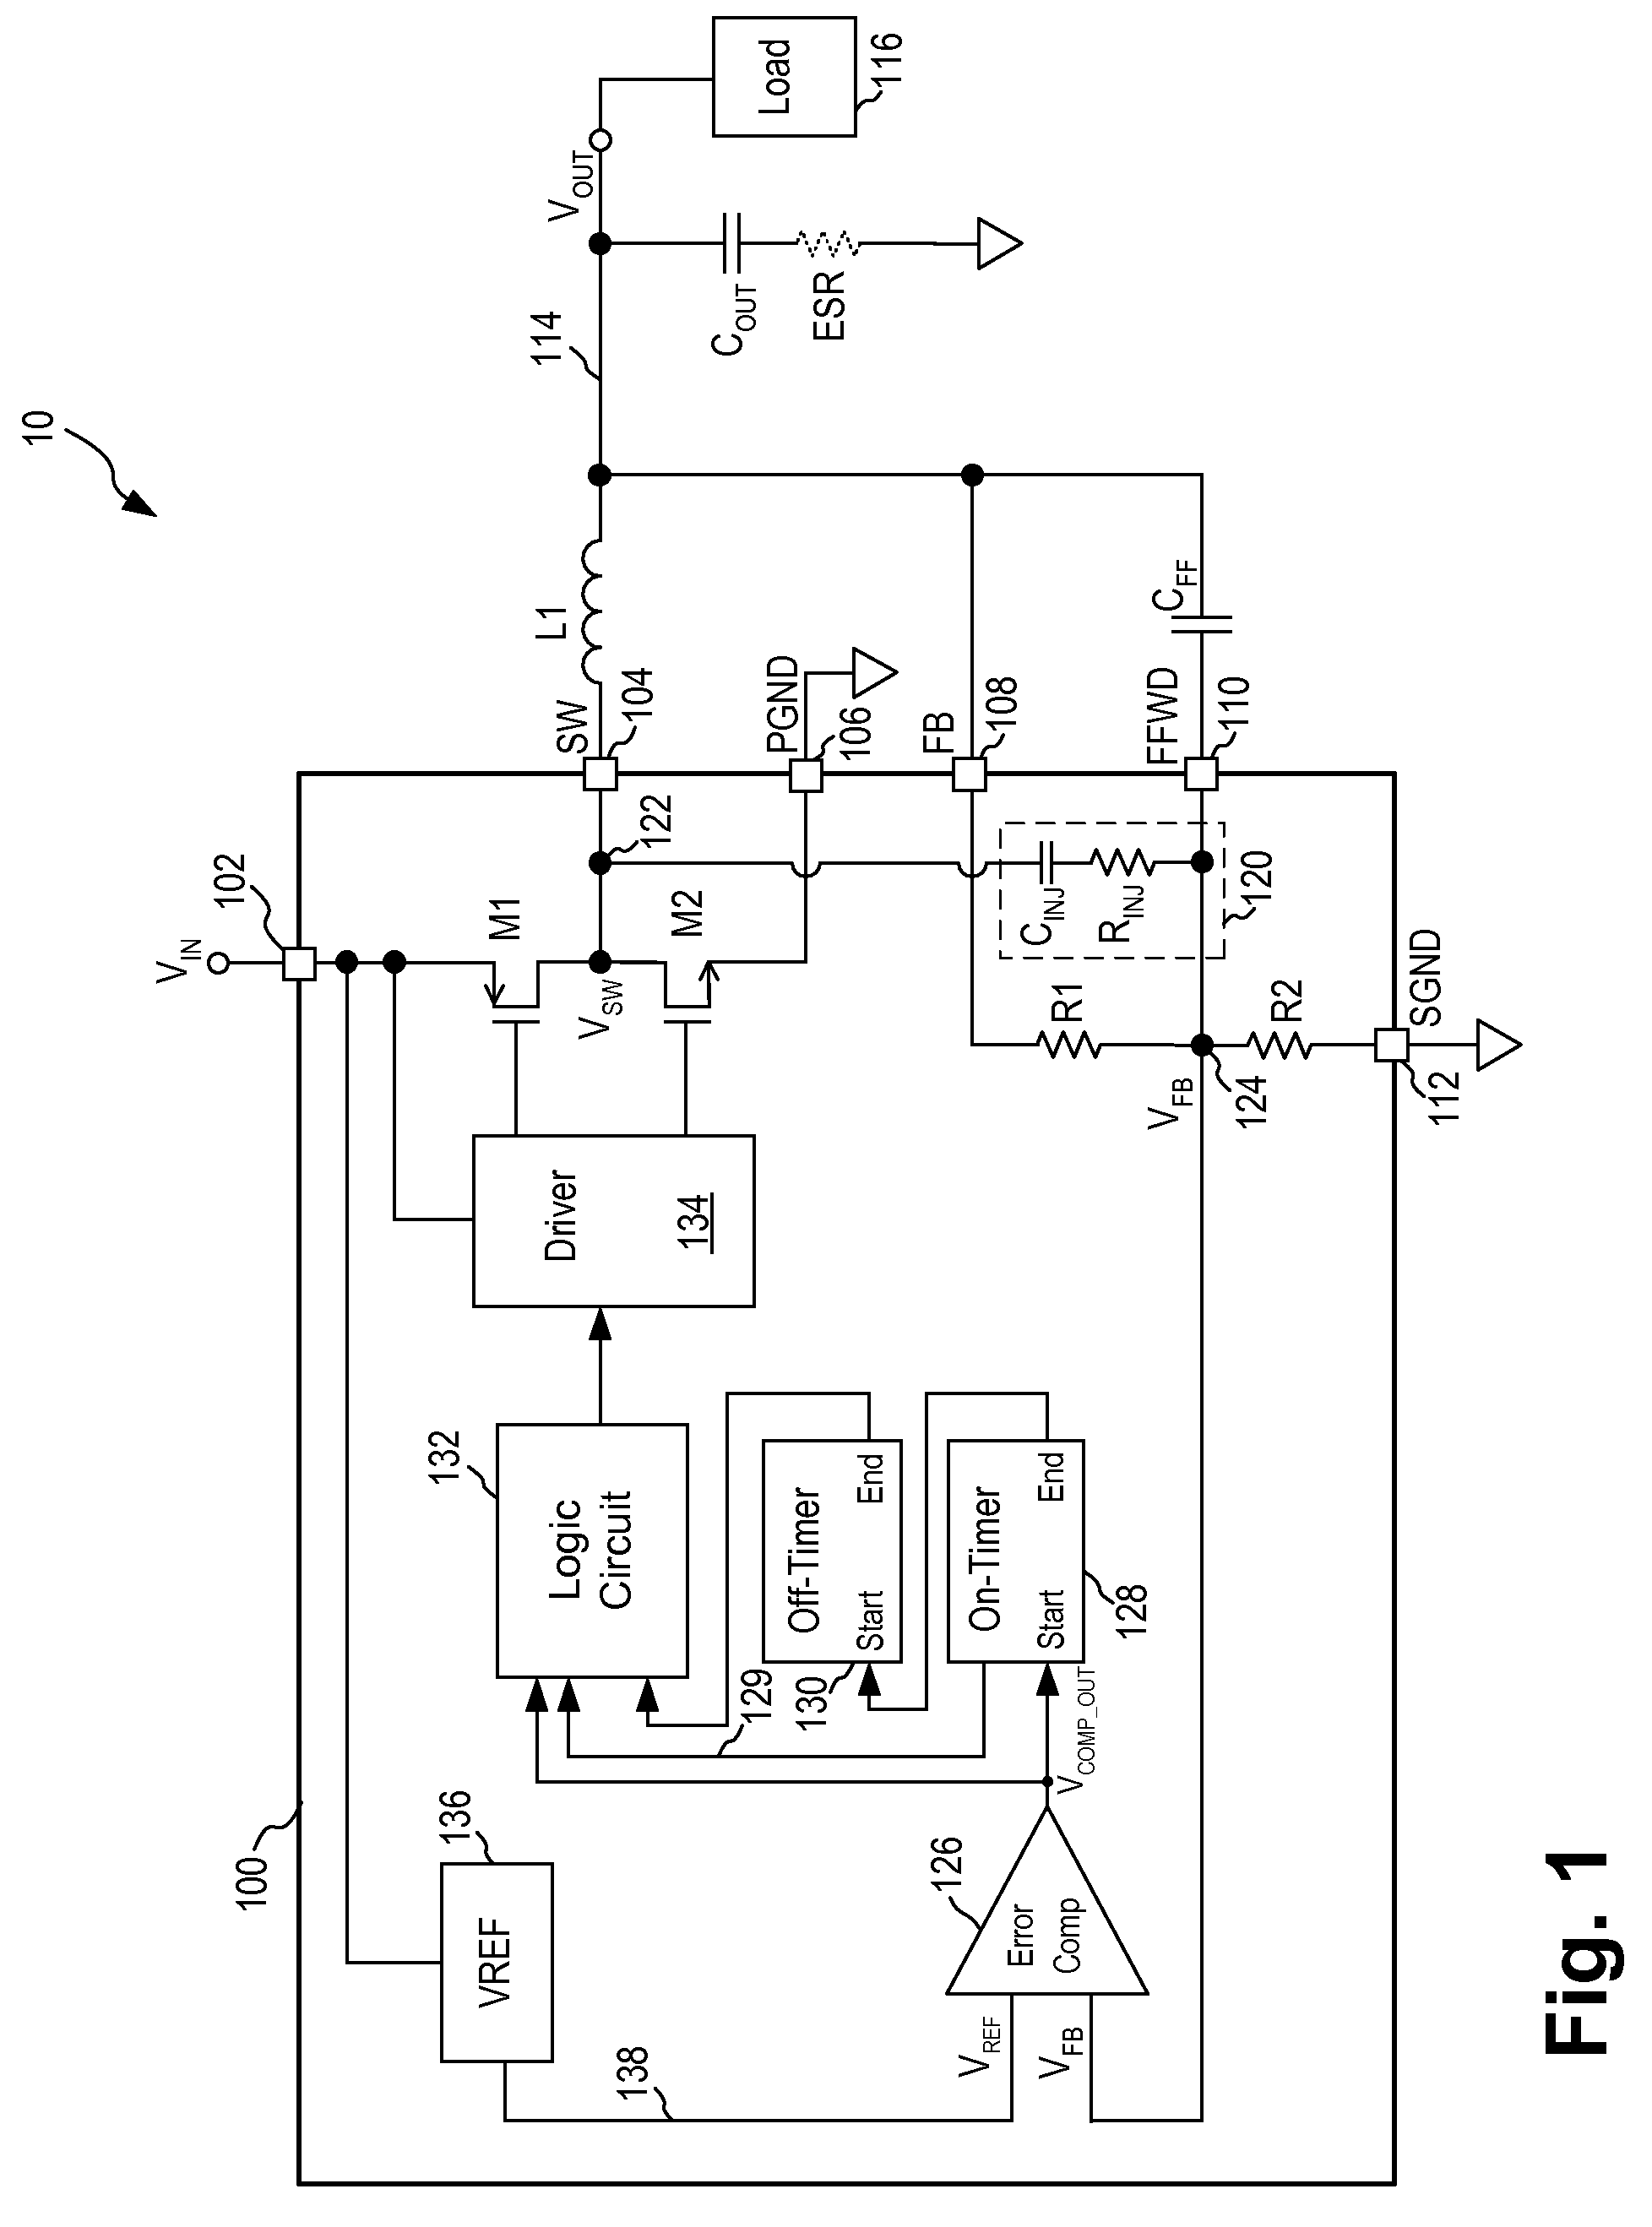 Constant on-time regulator with internal ripple generation and improved output voltage accuracy